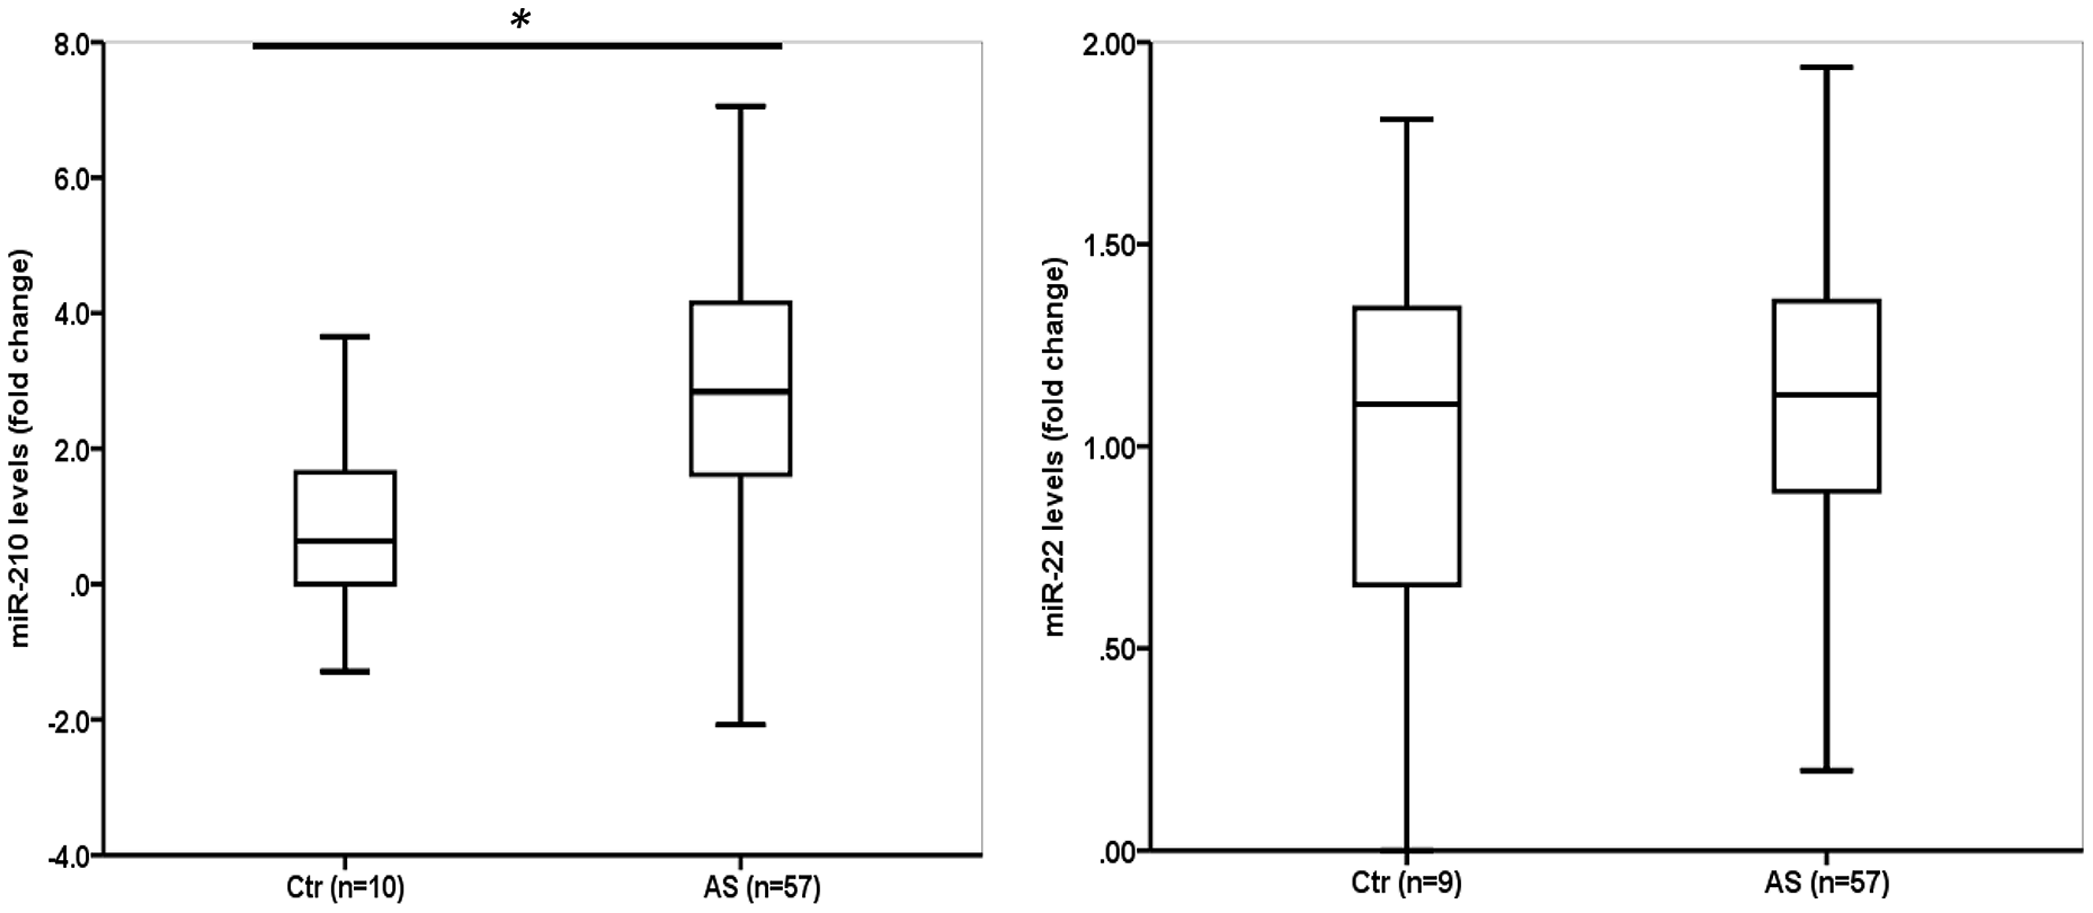 Figure 2 miR-210 levels were significantly increased in patients with AS compared to age- and gender-matched control subjects, whereas miR-22 levels were not altered.